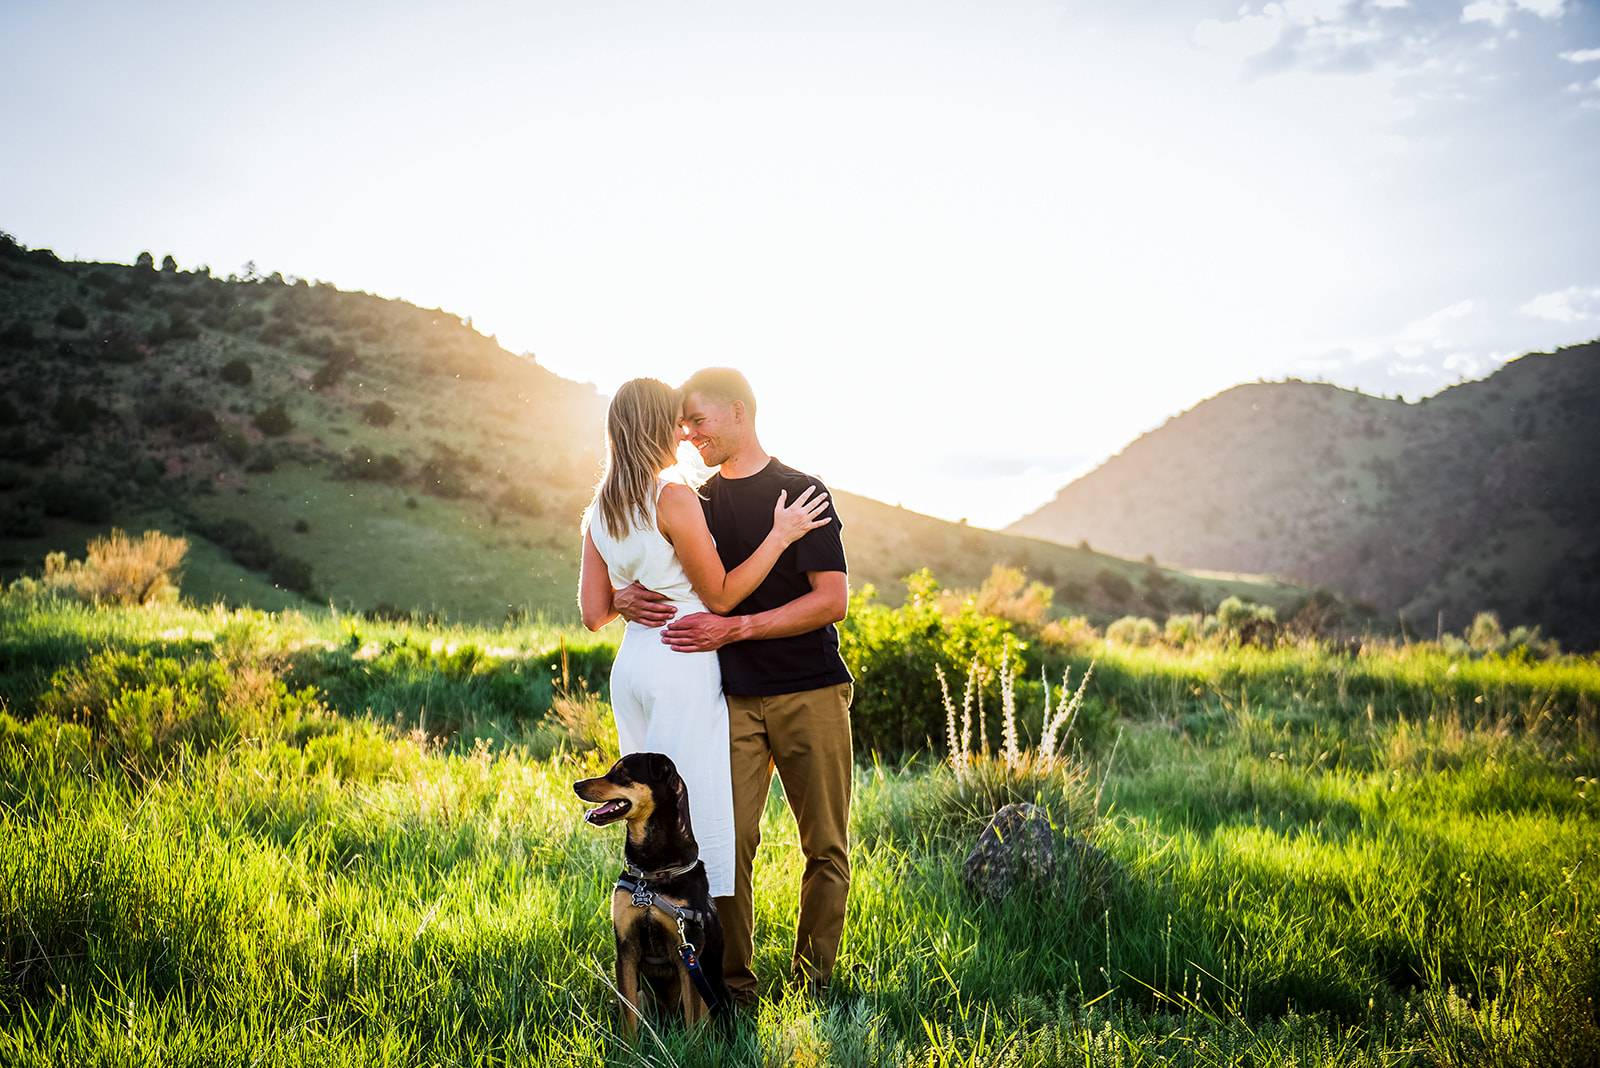 Mount falcon summer engagement session. Glowy sun and dog engagement session. Sunset engagement session in denver